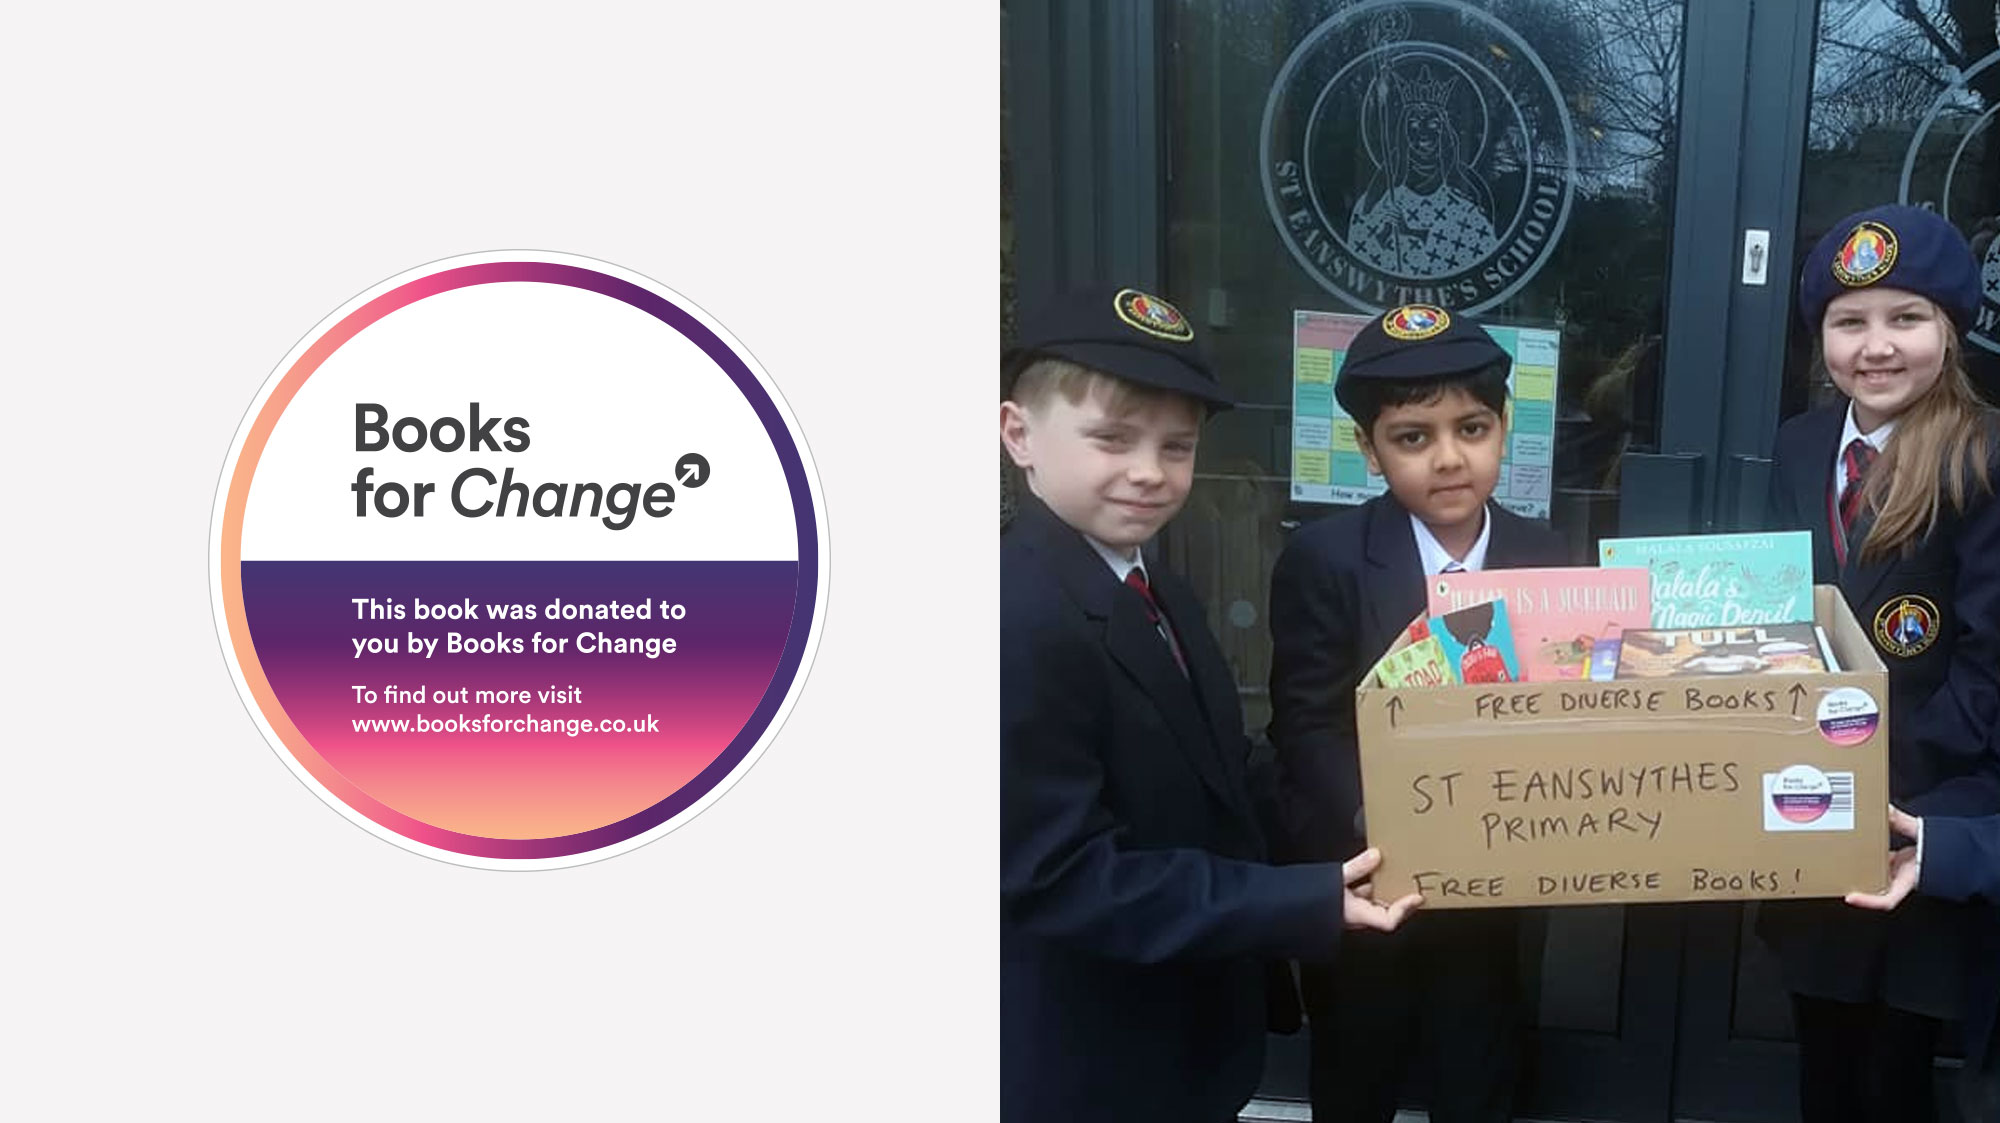 Books for Change